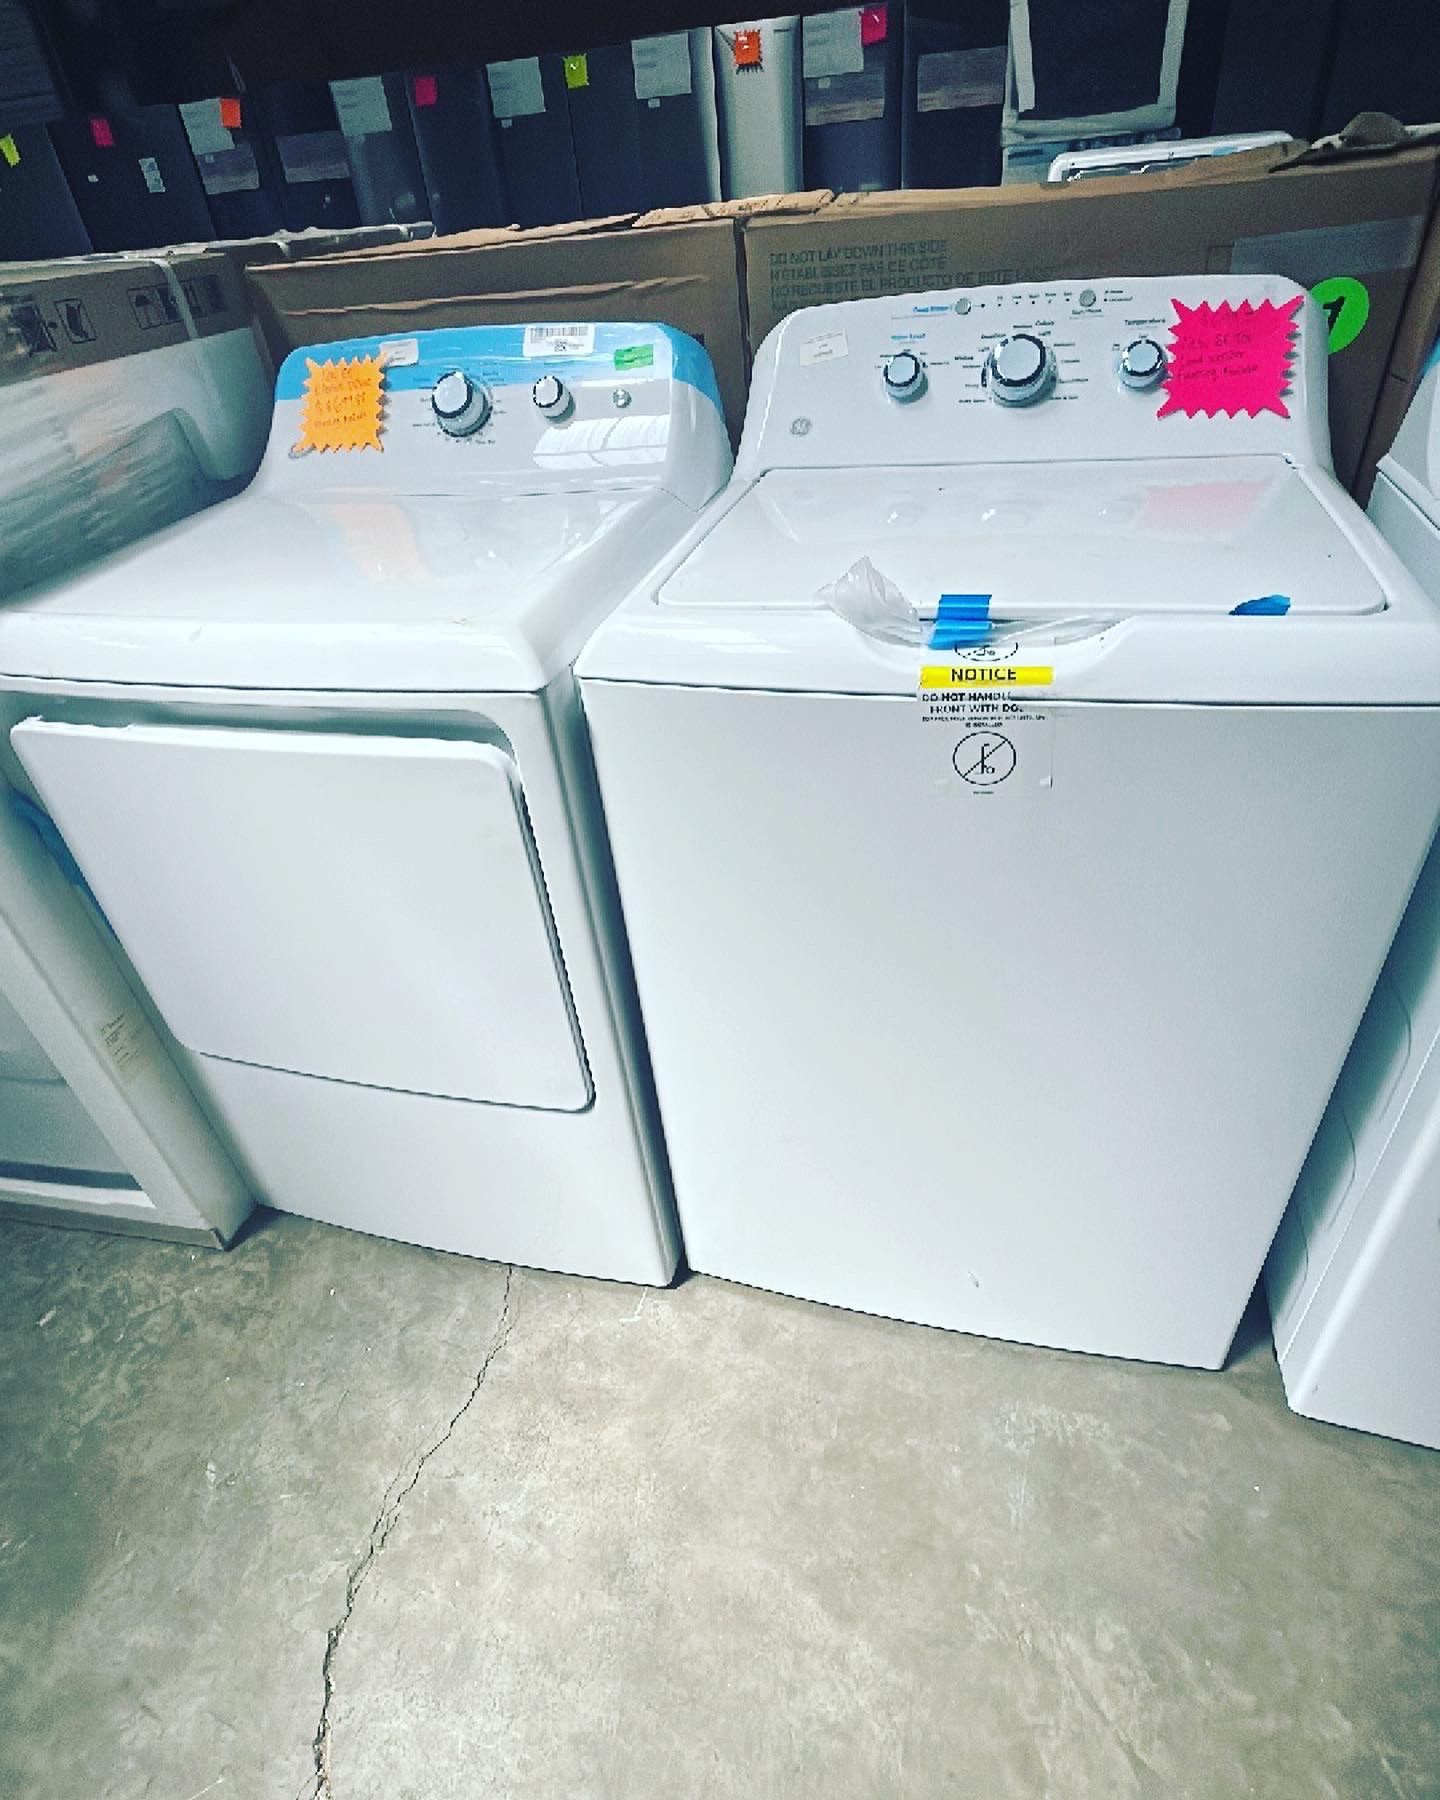 NEW GE WASHER AND DRYER SET $1399 1 Year Warranty Financing Available Only $54 Down No Credit Needed